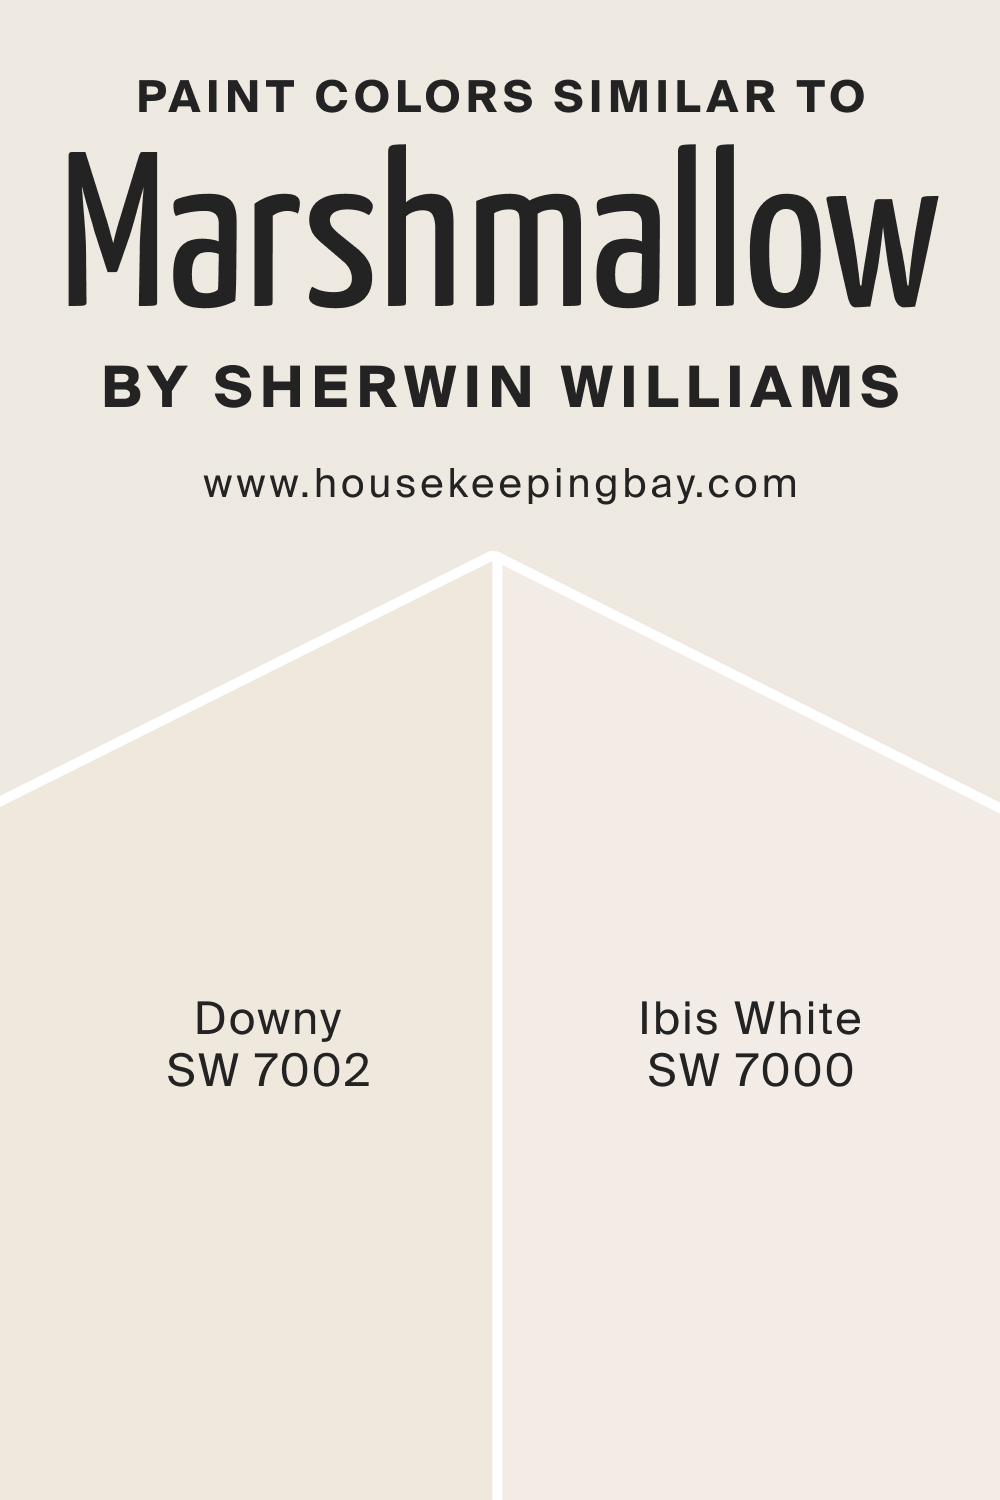 Paint Colors Similar to SW Marshmallow by Sherwin Williams